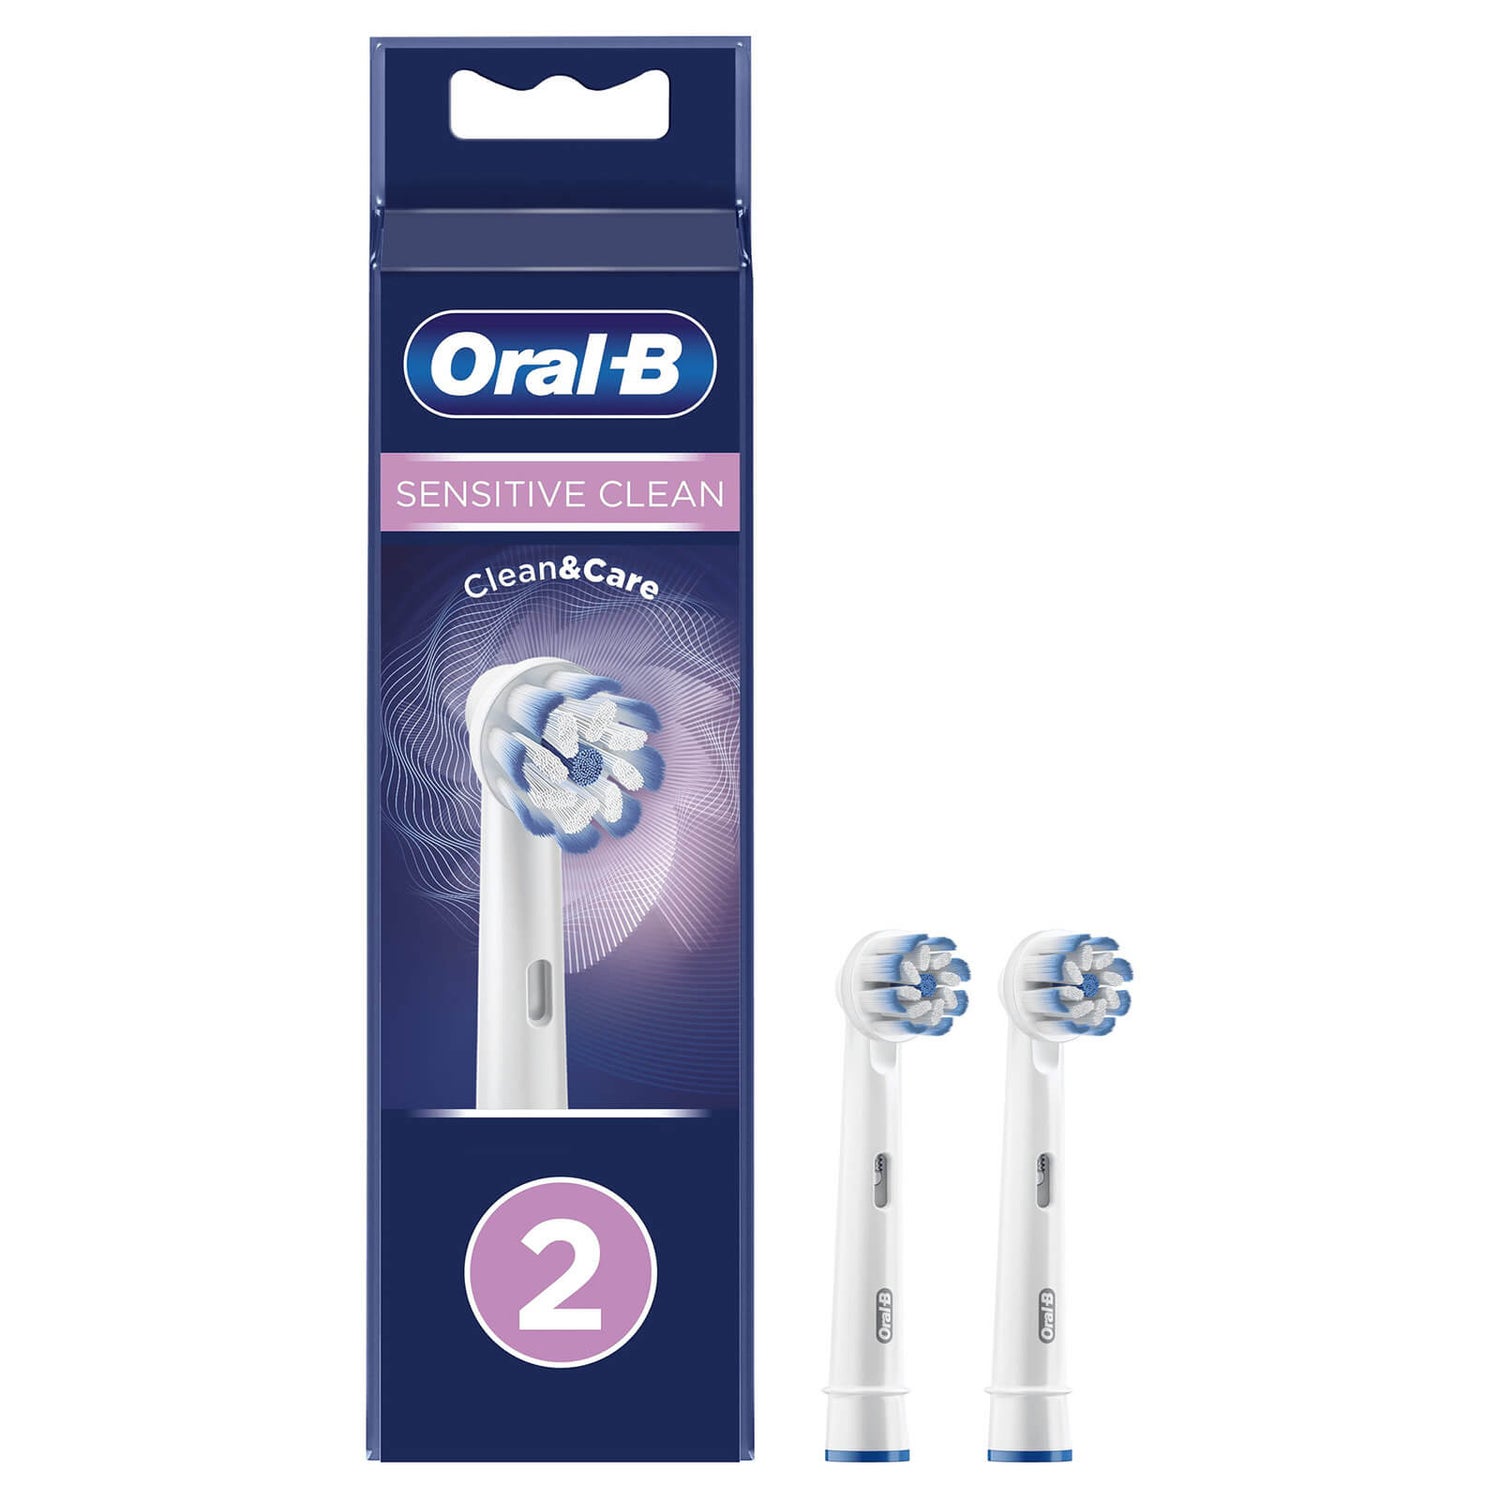 Oral-B Sensitive Clean Toothbrush Head, Pack of 2 Counts